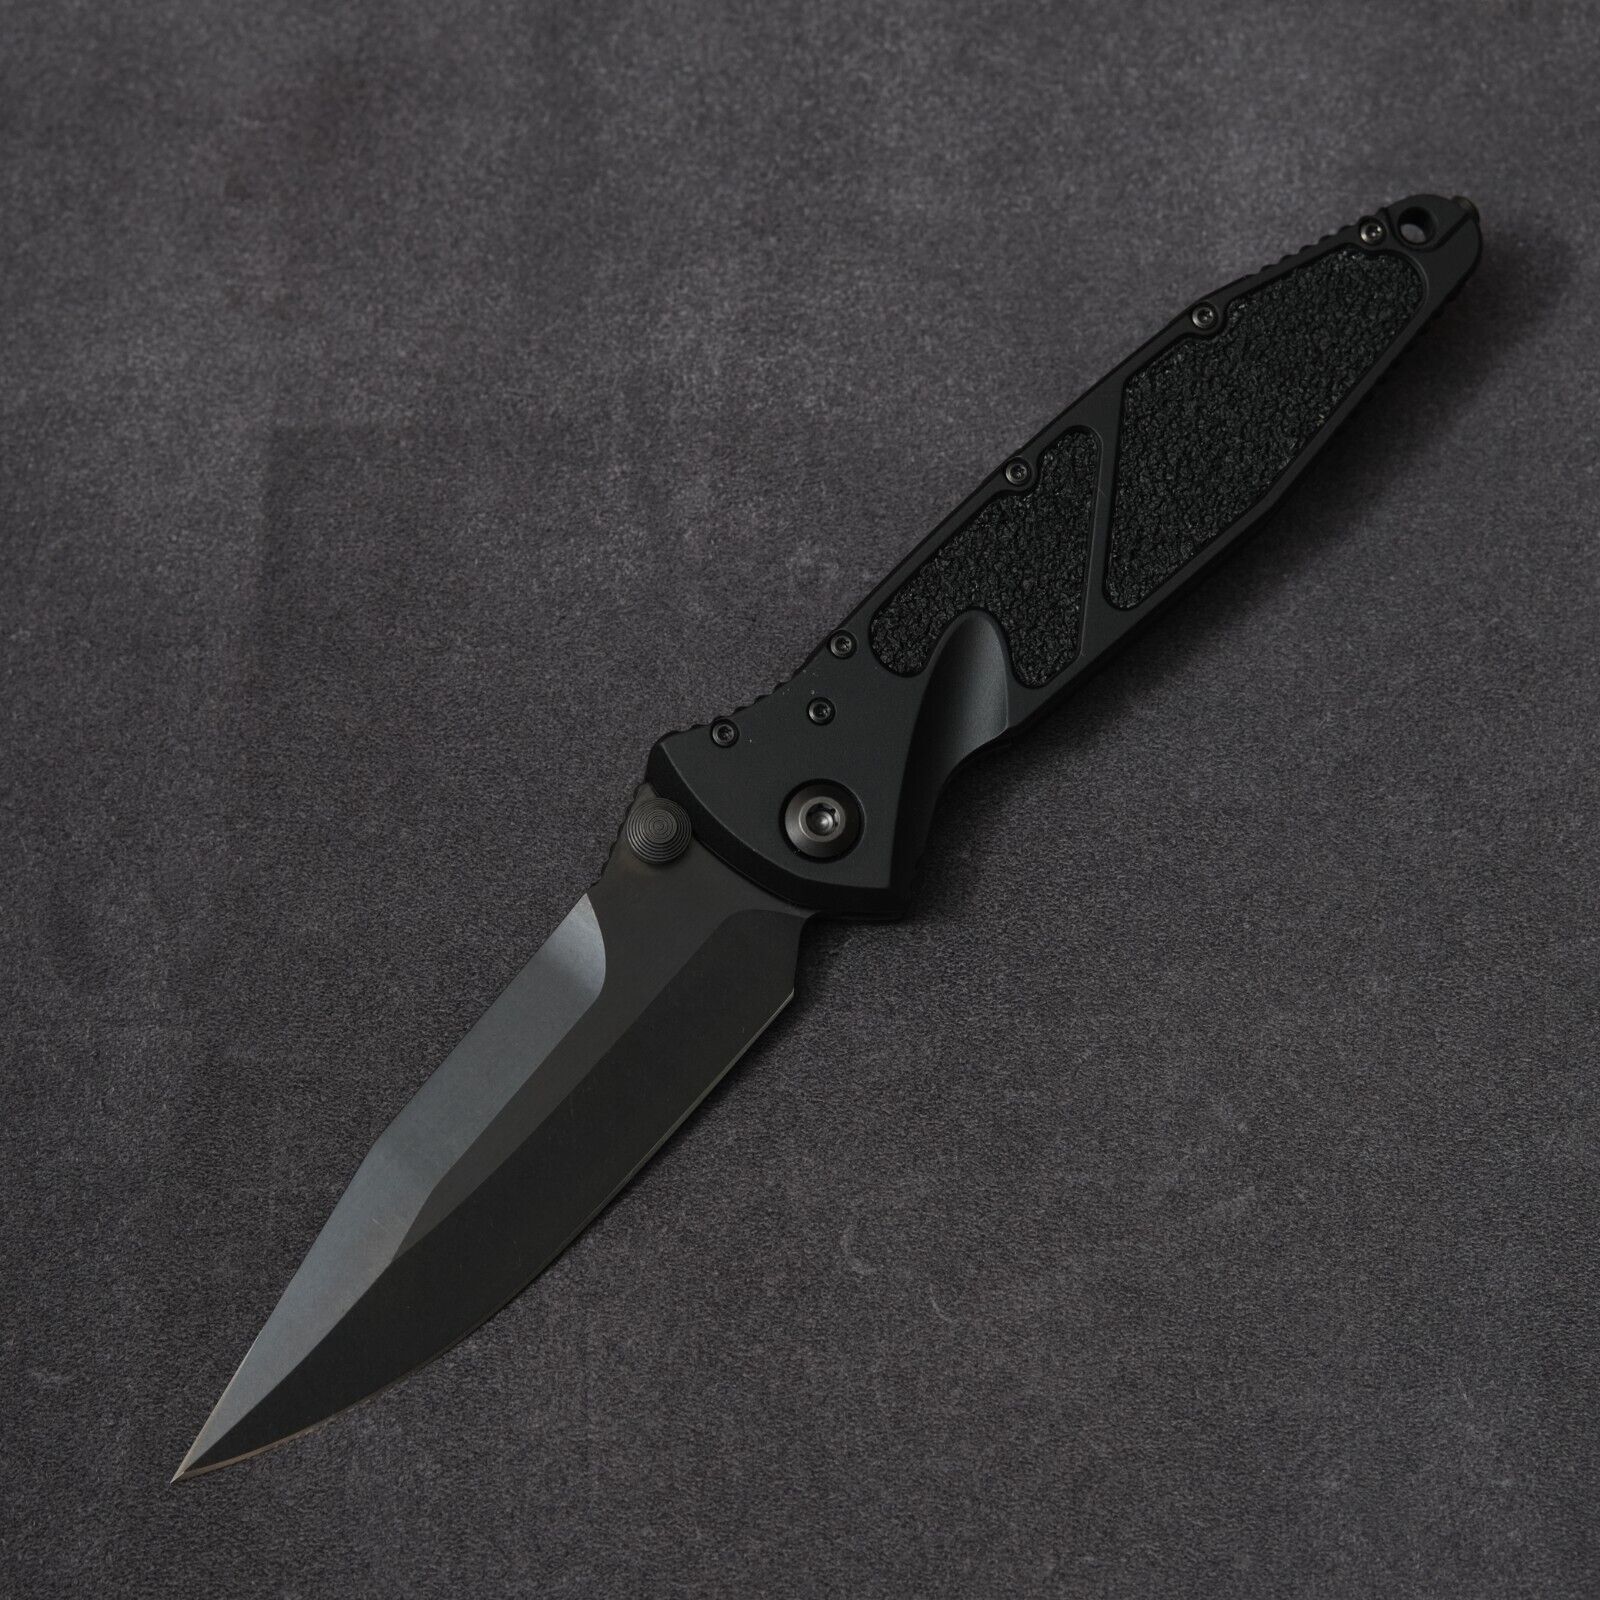 Microtech Socom Elite Signature Shadow Manual - Spear Point / M390